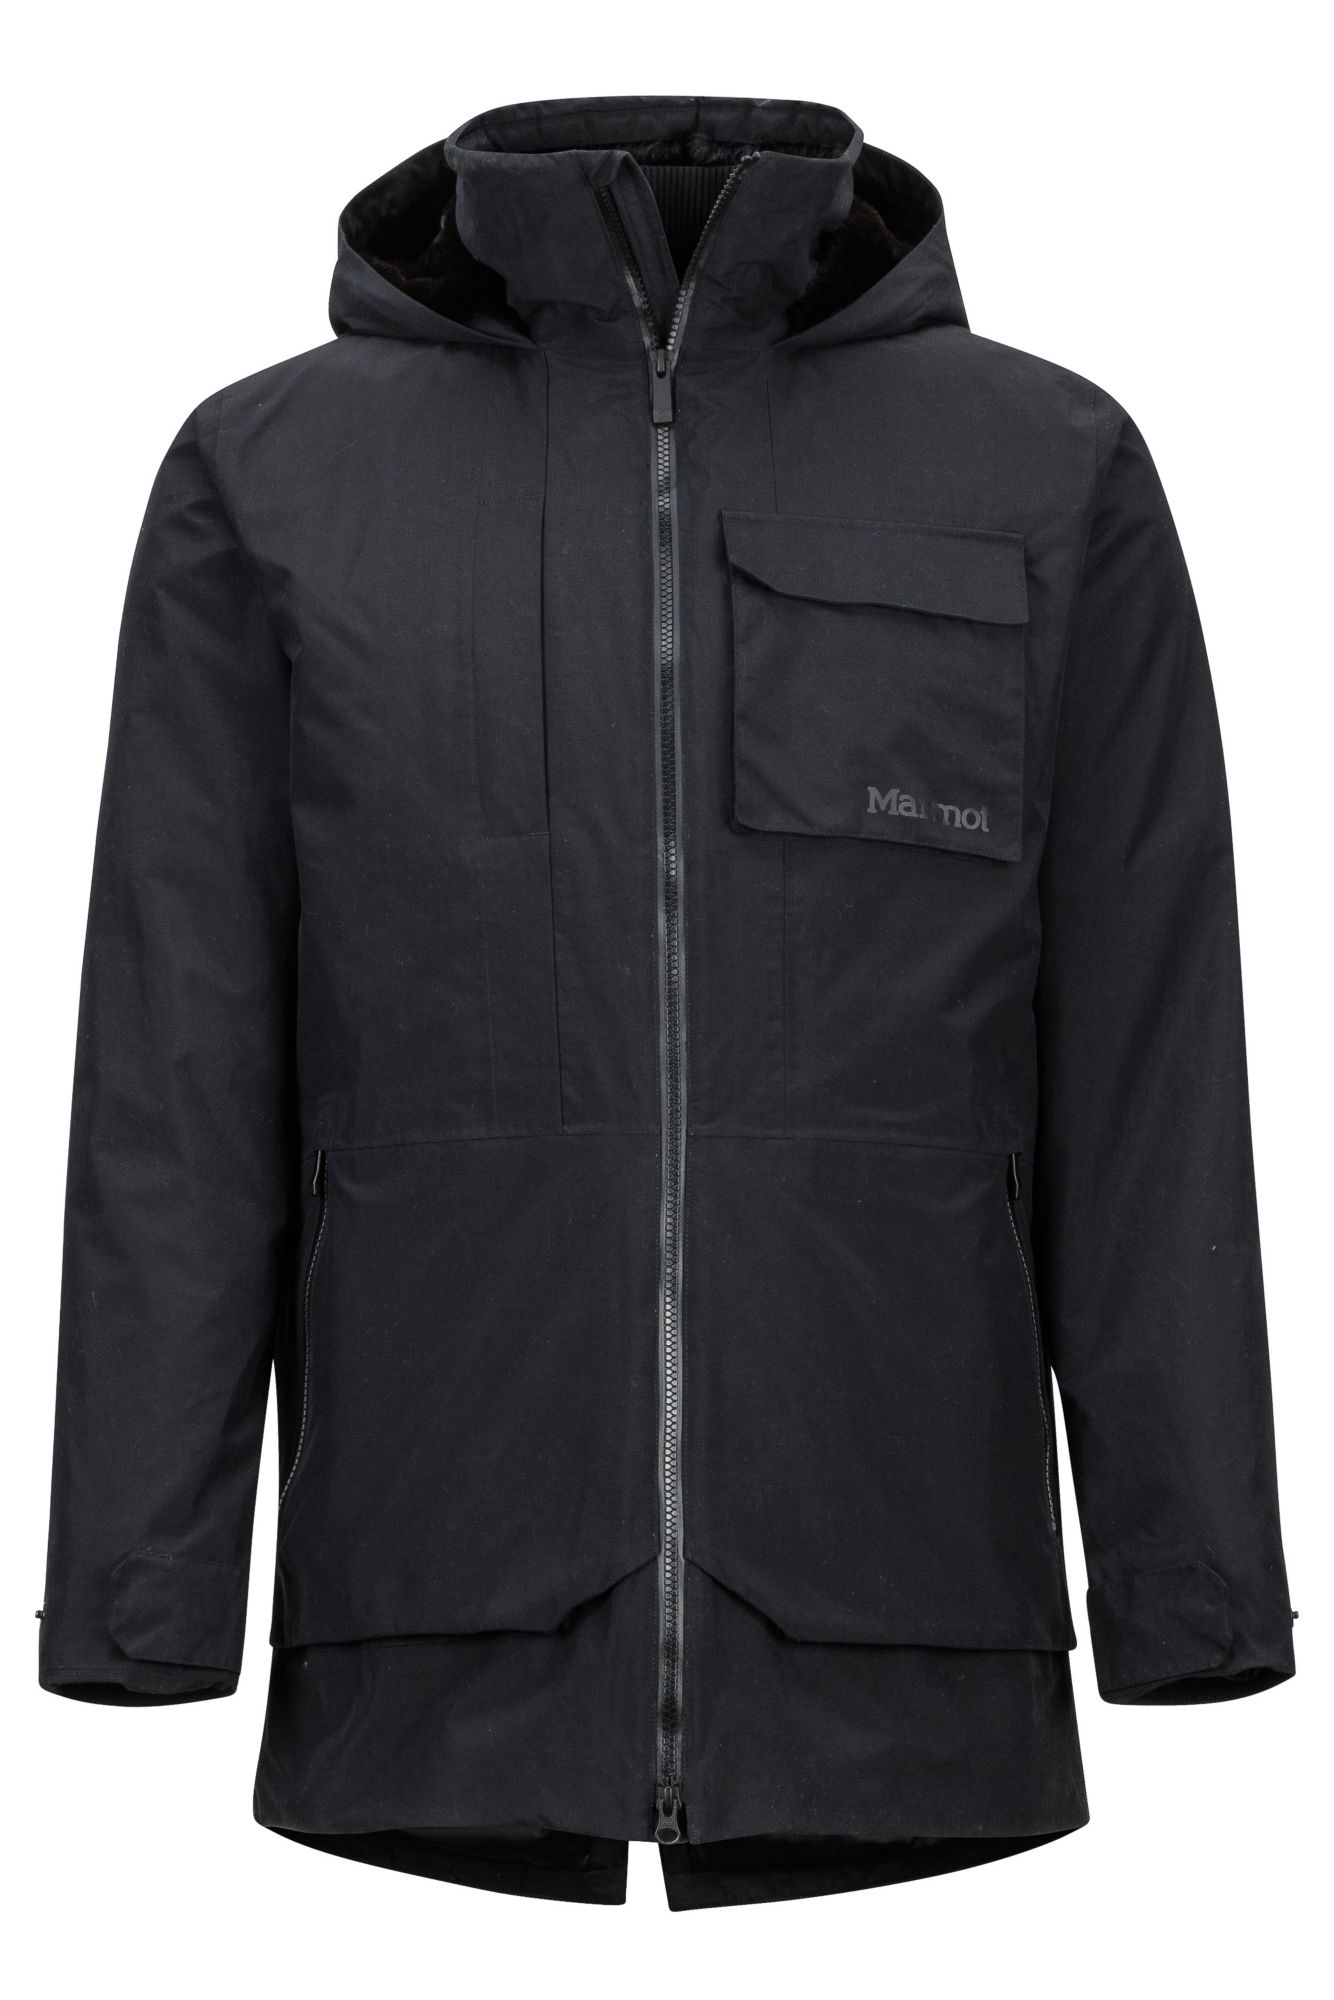 Men's Drake Passage Featherless Component 3-in-1 Jacket